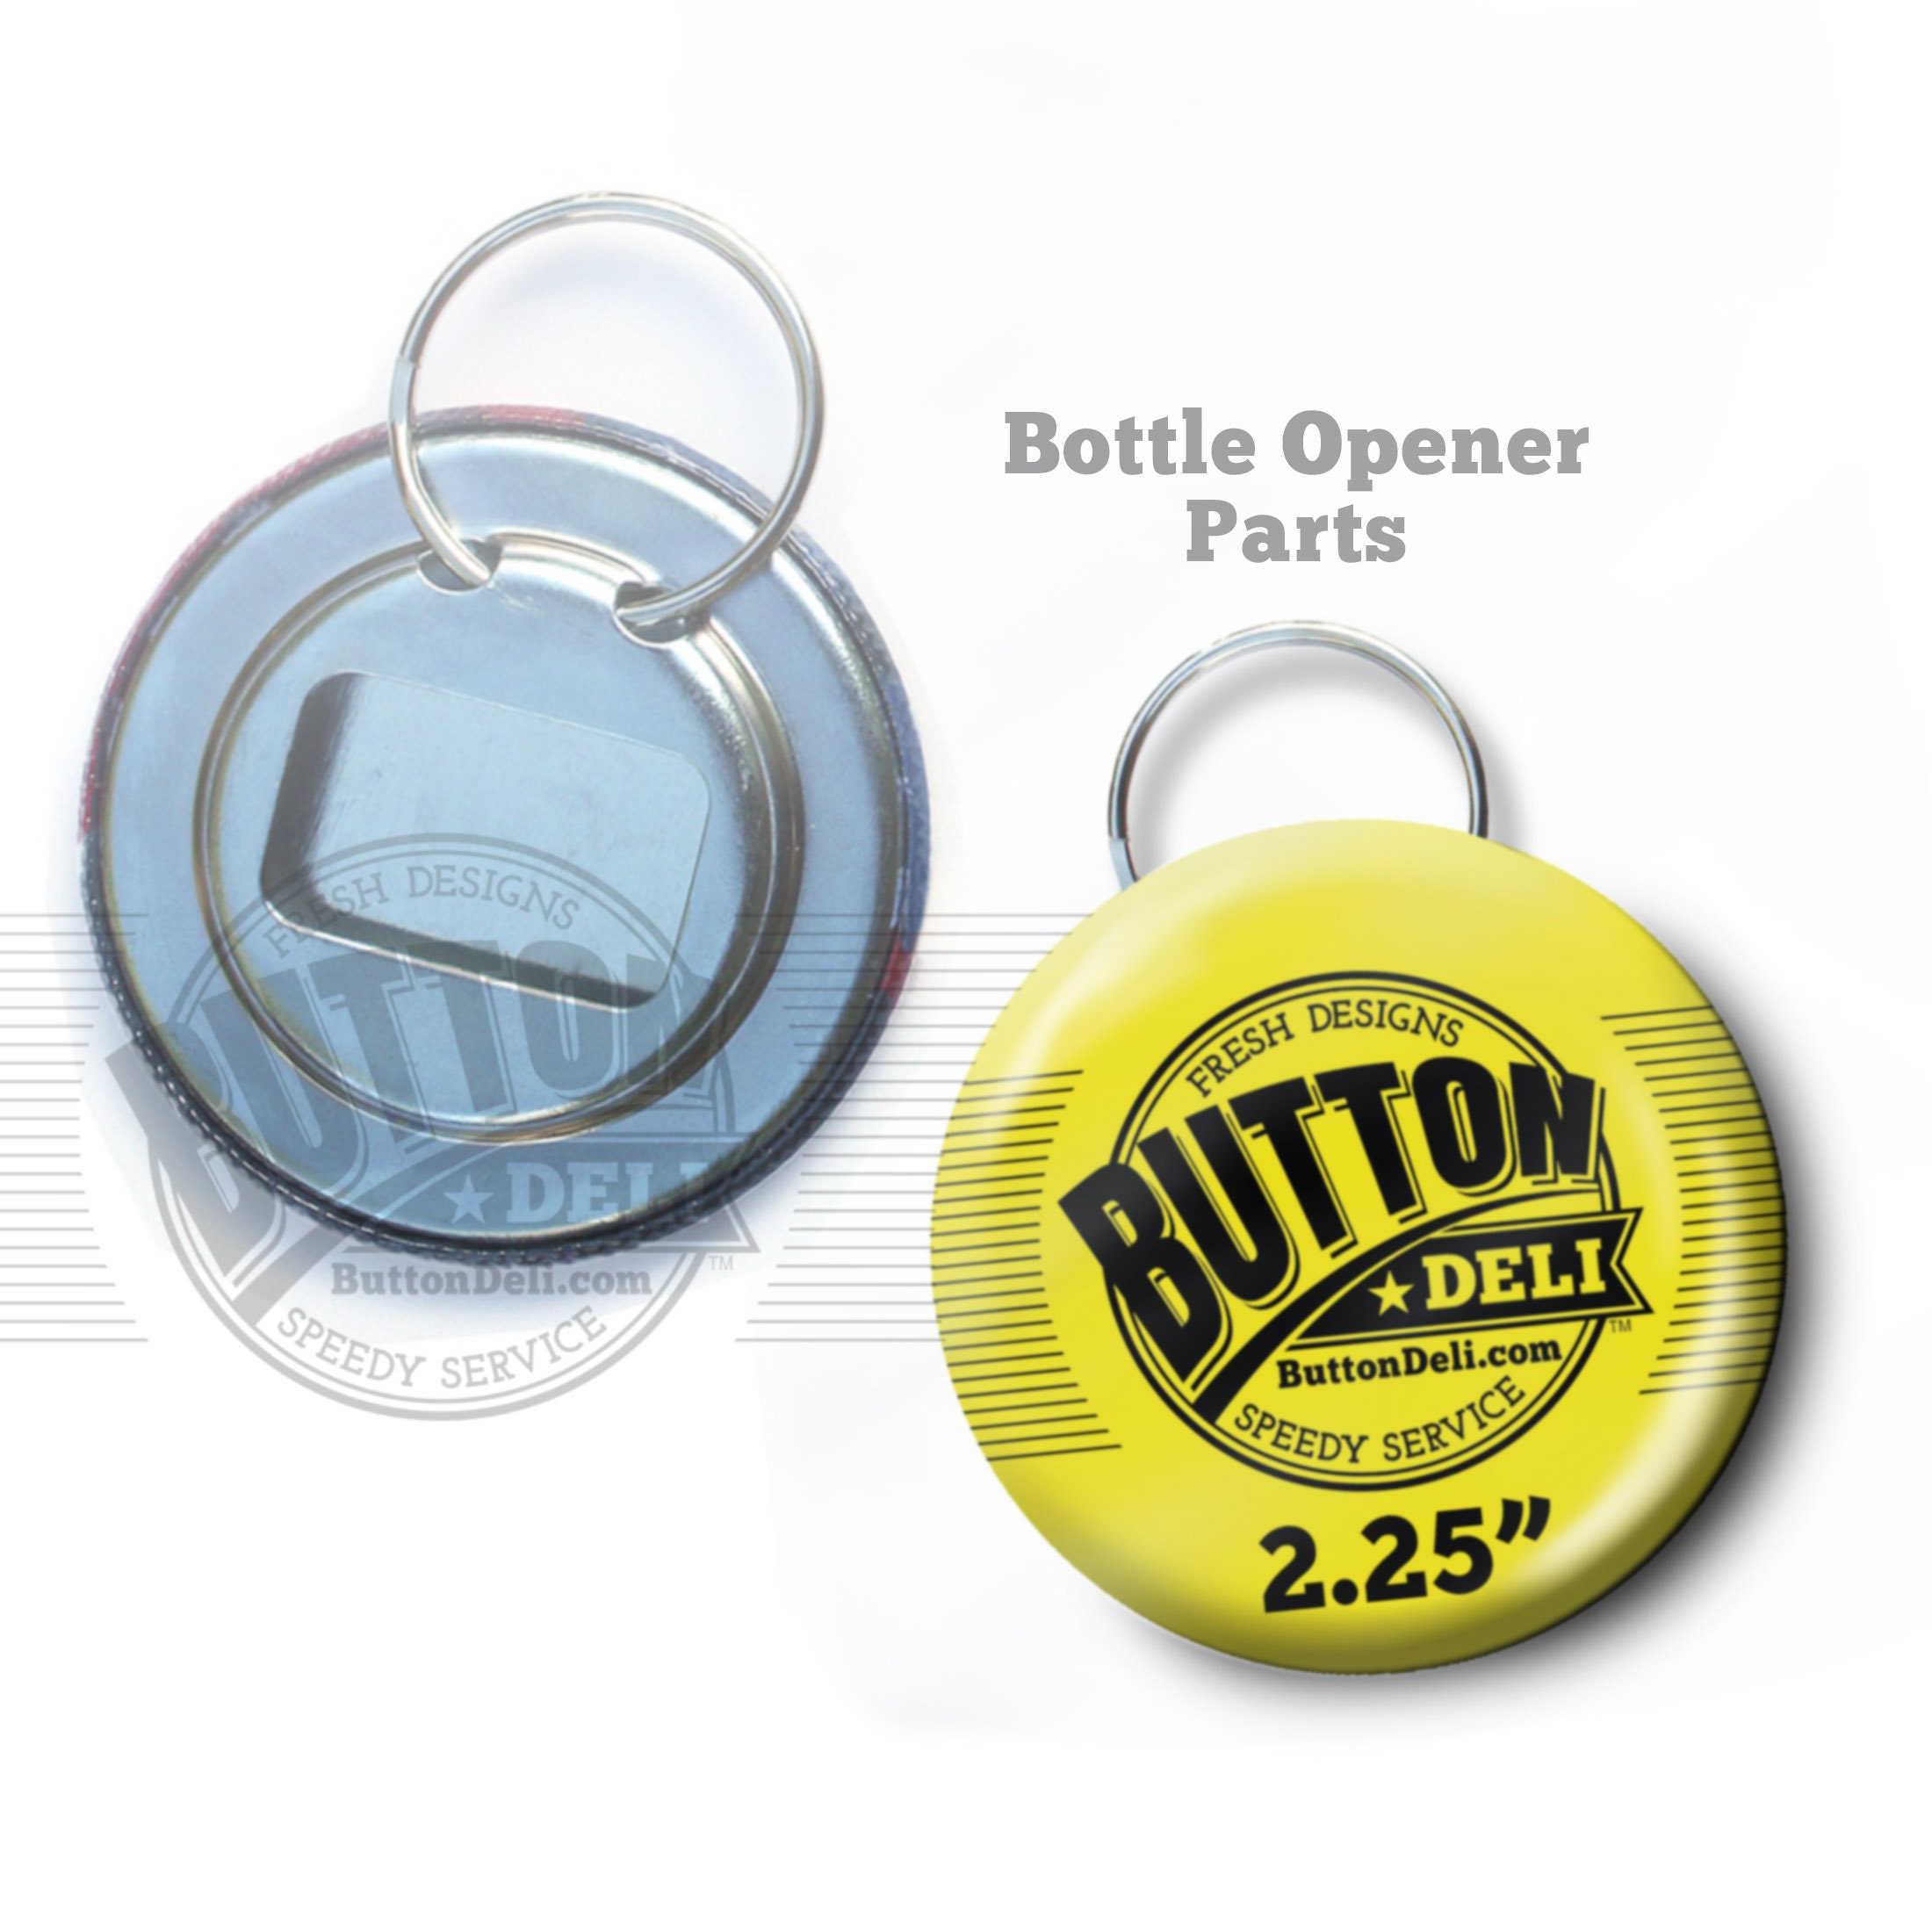 1.5 Versa-Back Snap Hook Keychain Set 1000 Sets by American Button Machines